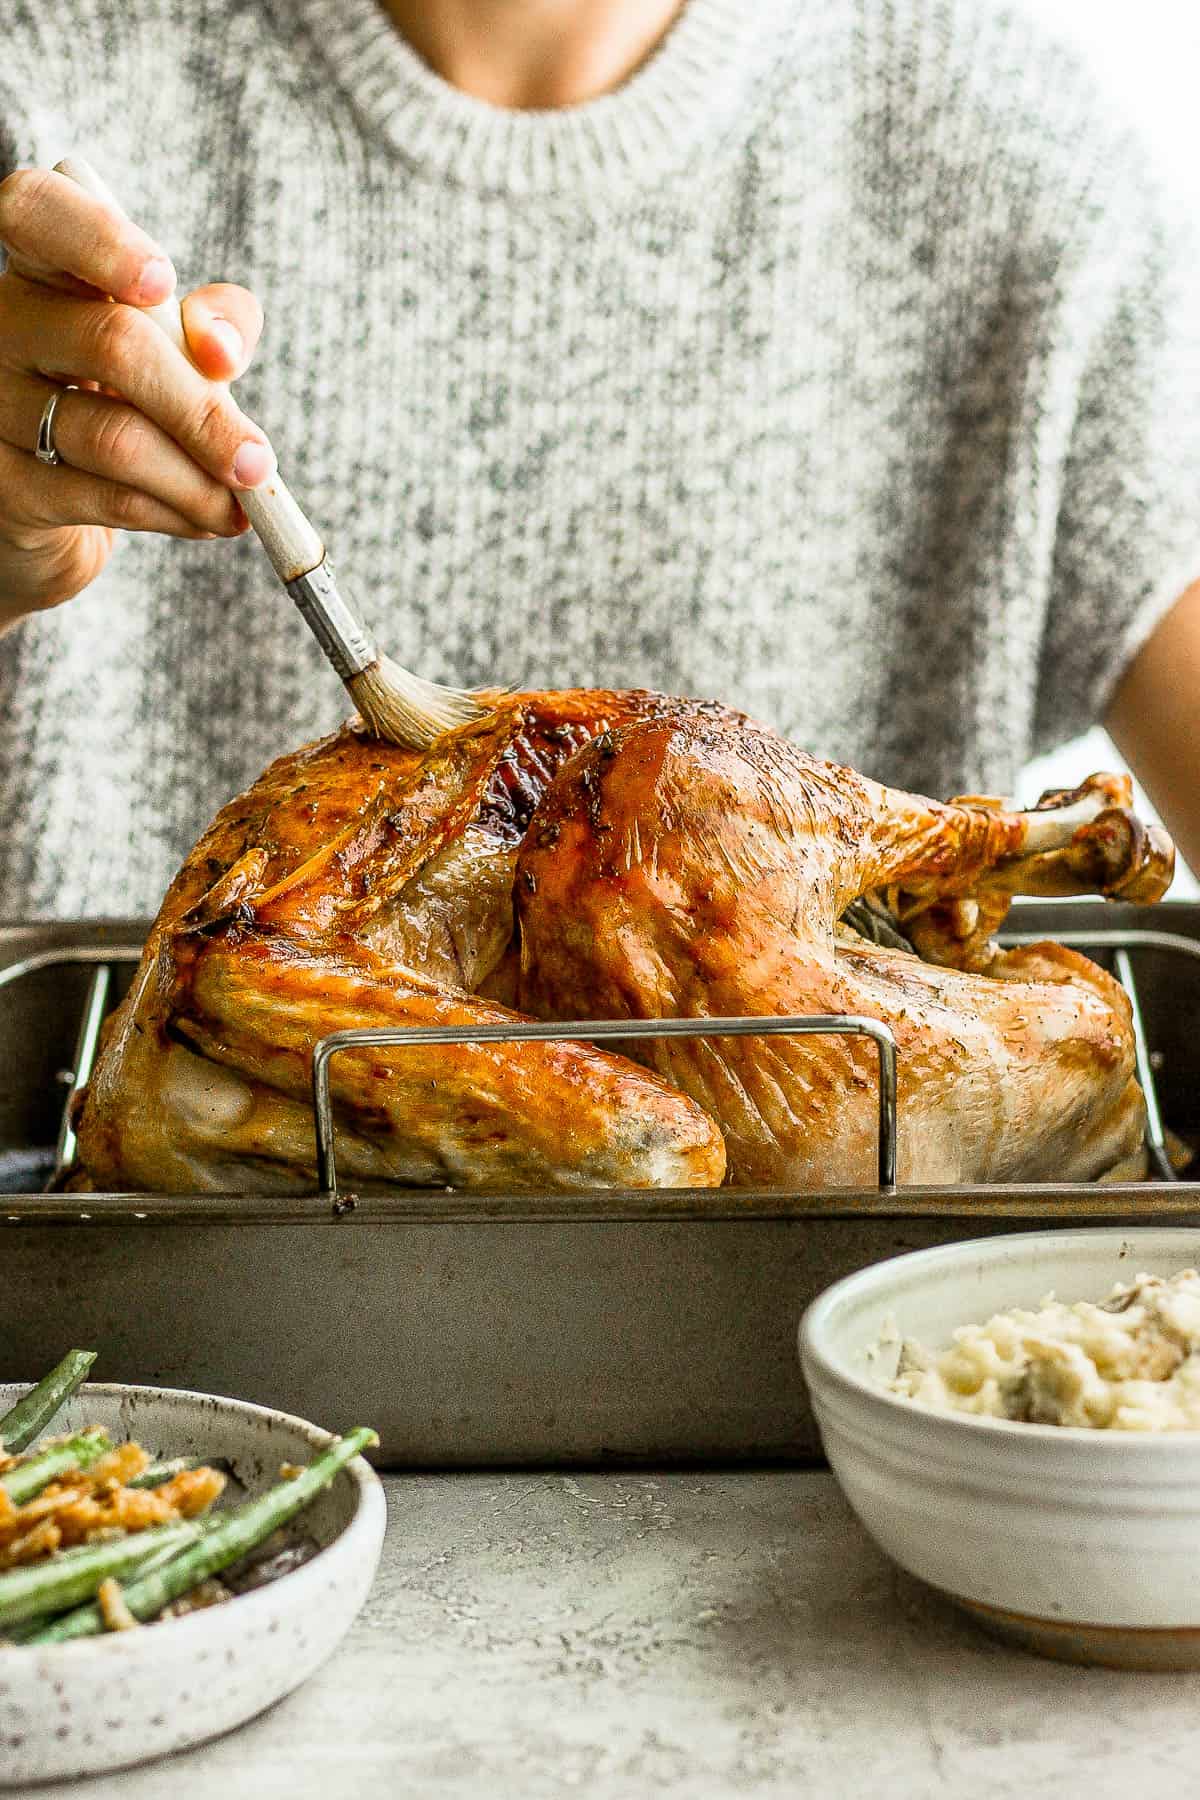 A simple and easy tutorial on how to cook a turkey.